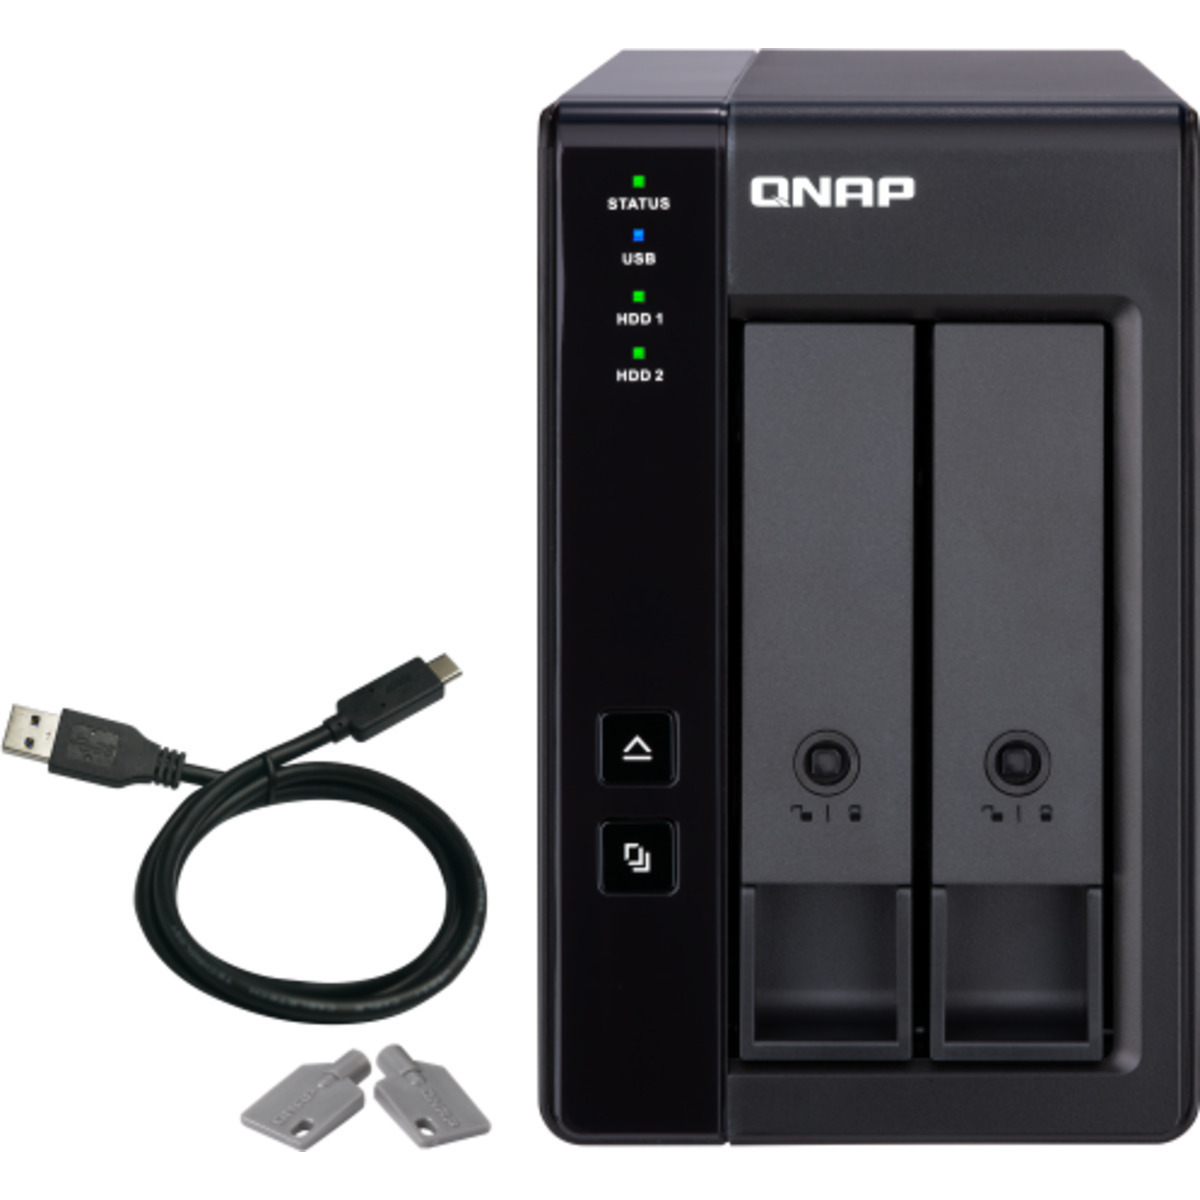 QNAP TR-002 Expansion Enclosure Burn-In Tested Configurations